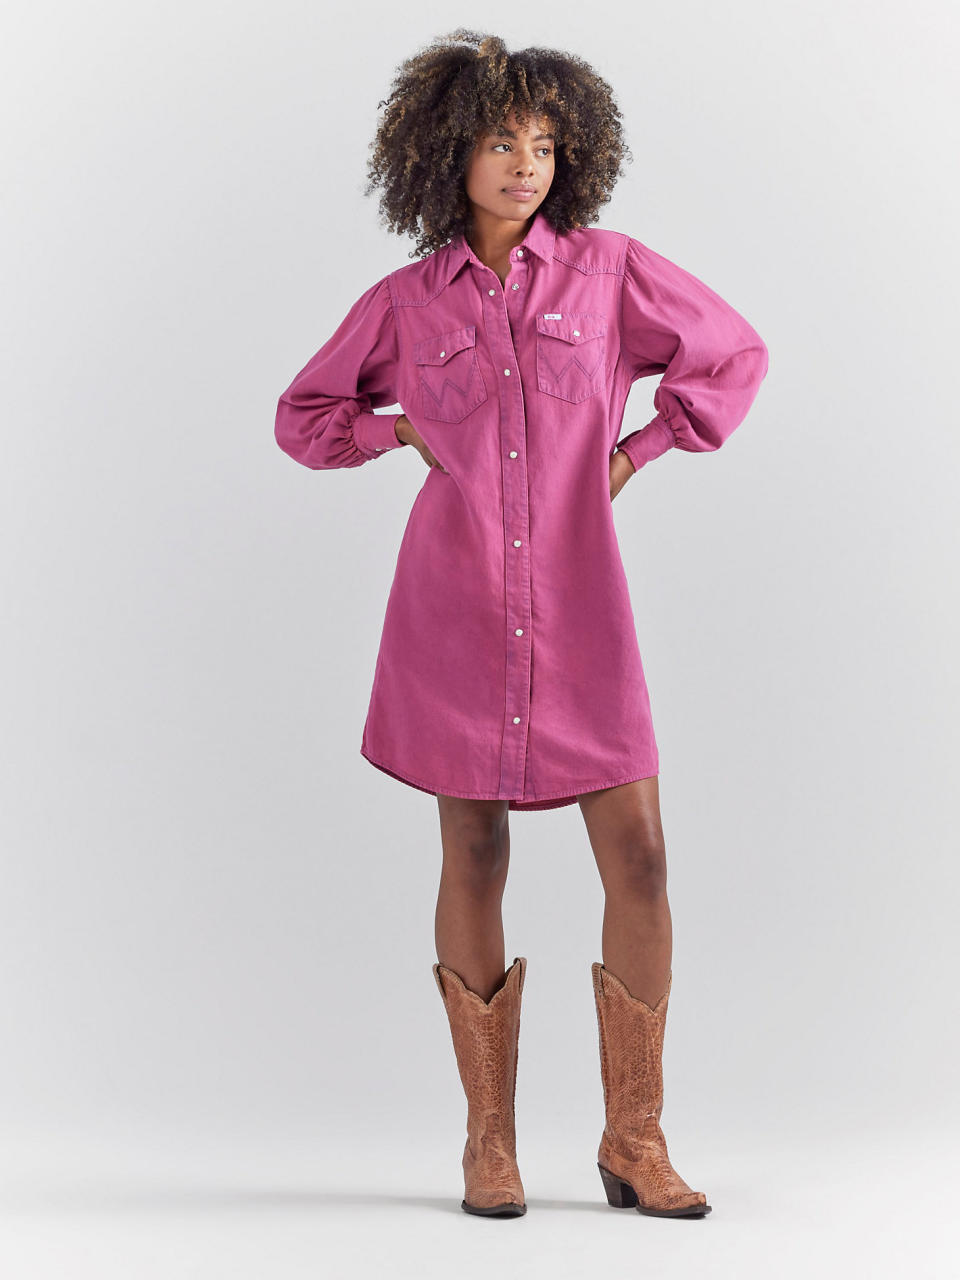 model wearing pink denim dress with brown cowboy boots